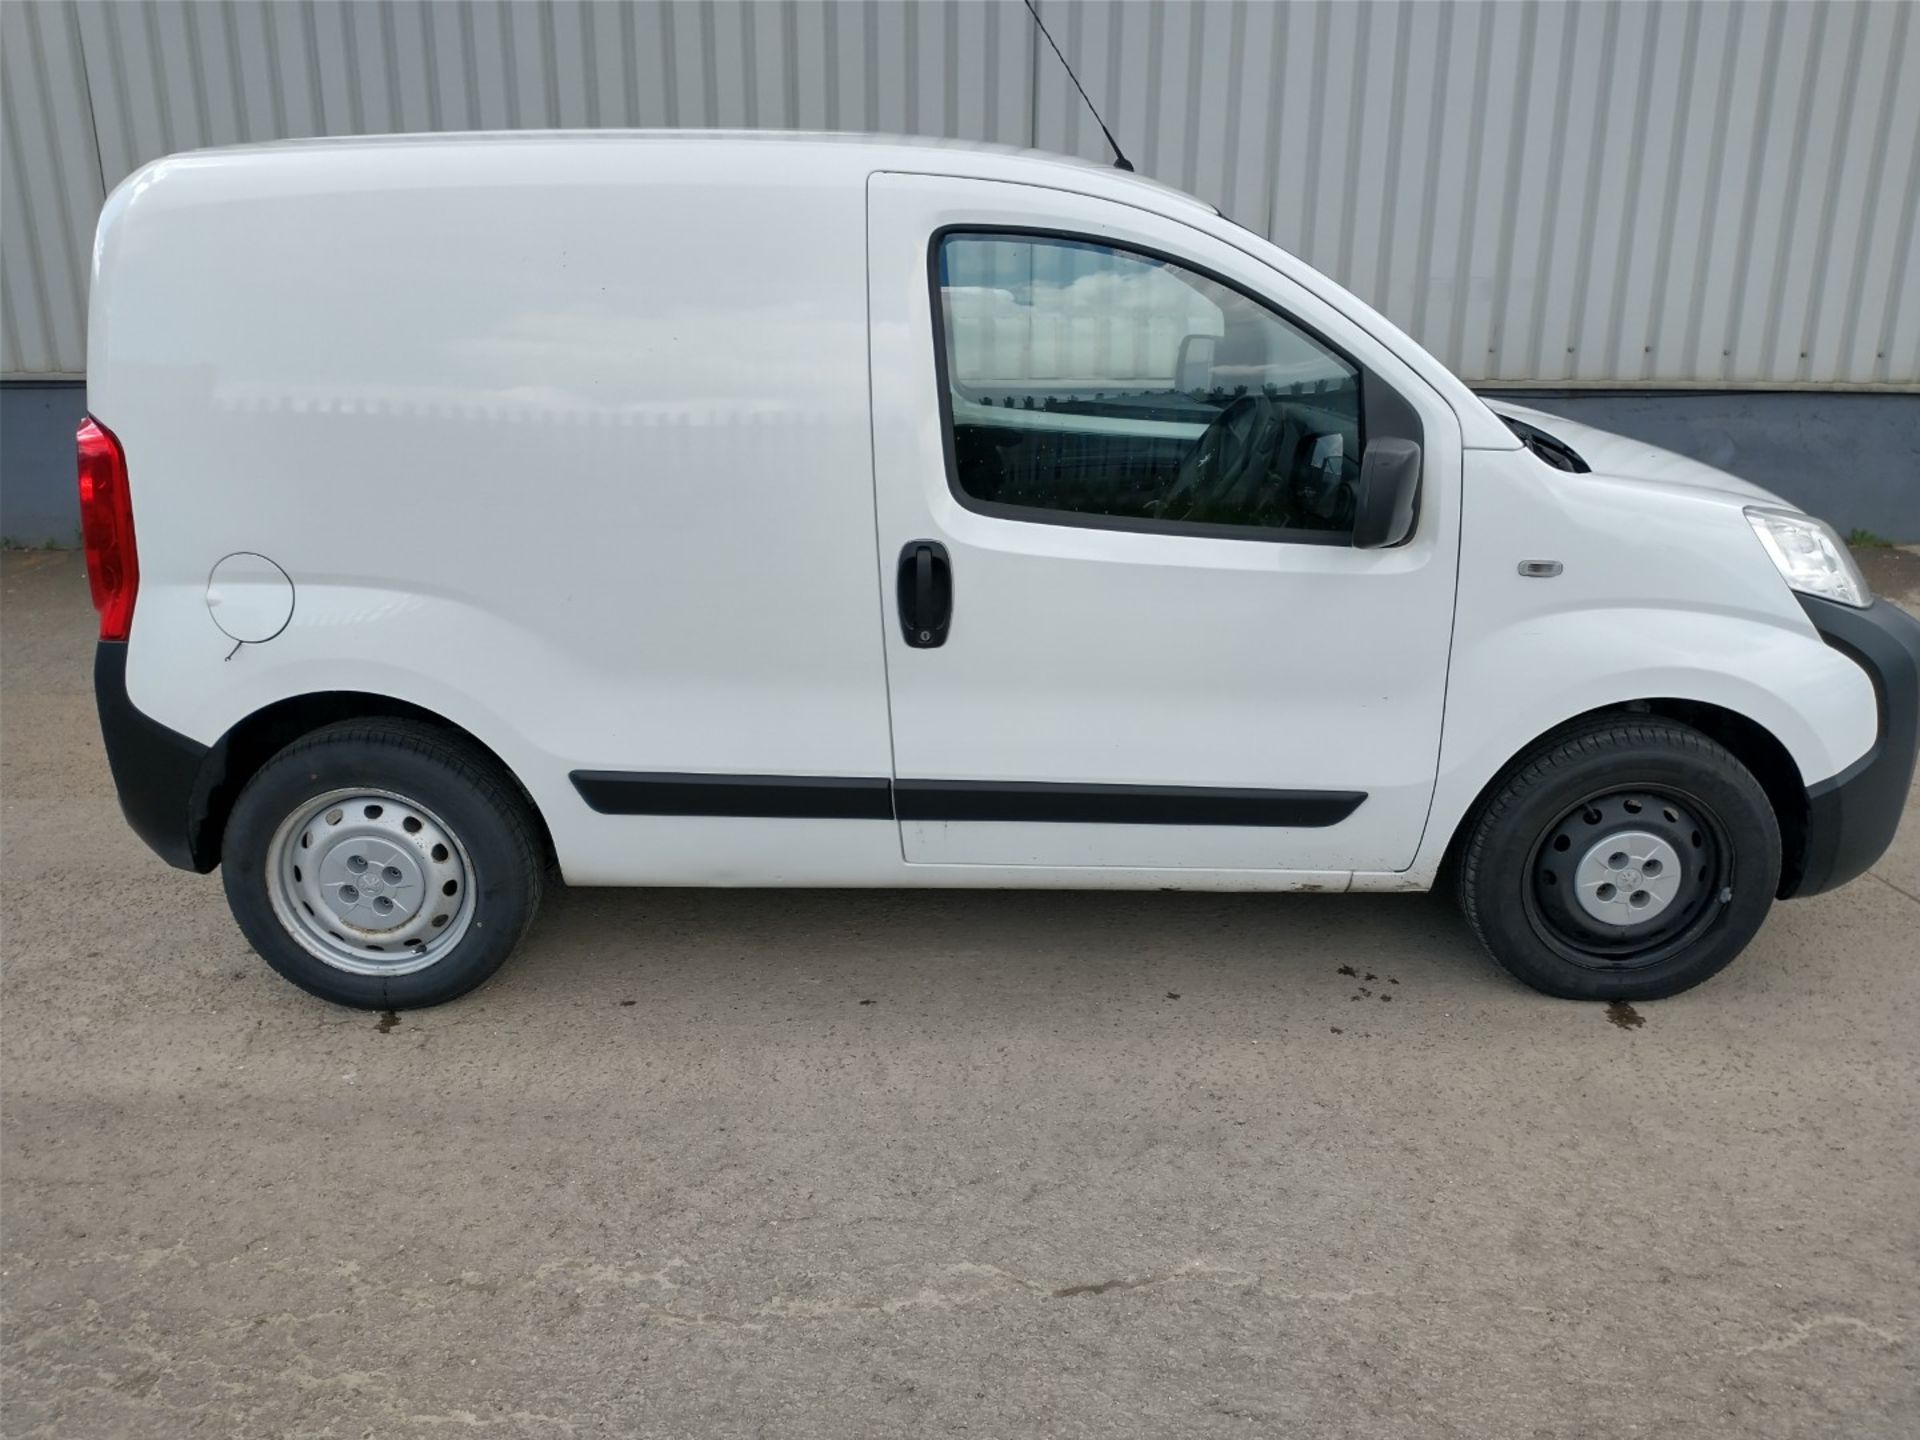 2016 Peugeot Bipper S Hdi Panel van - CL505 - Location: Corby - Image 5 of 15